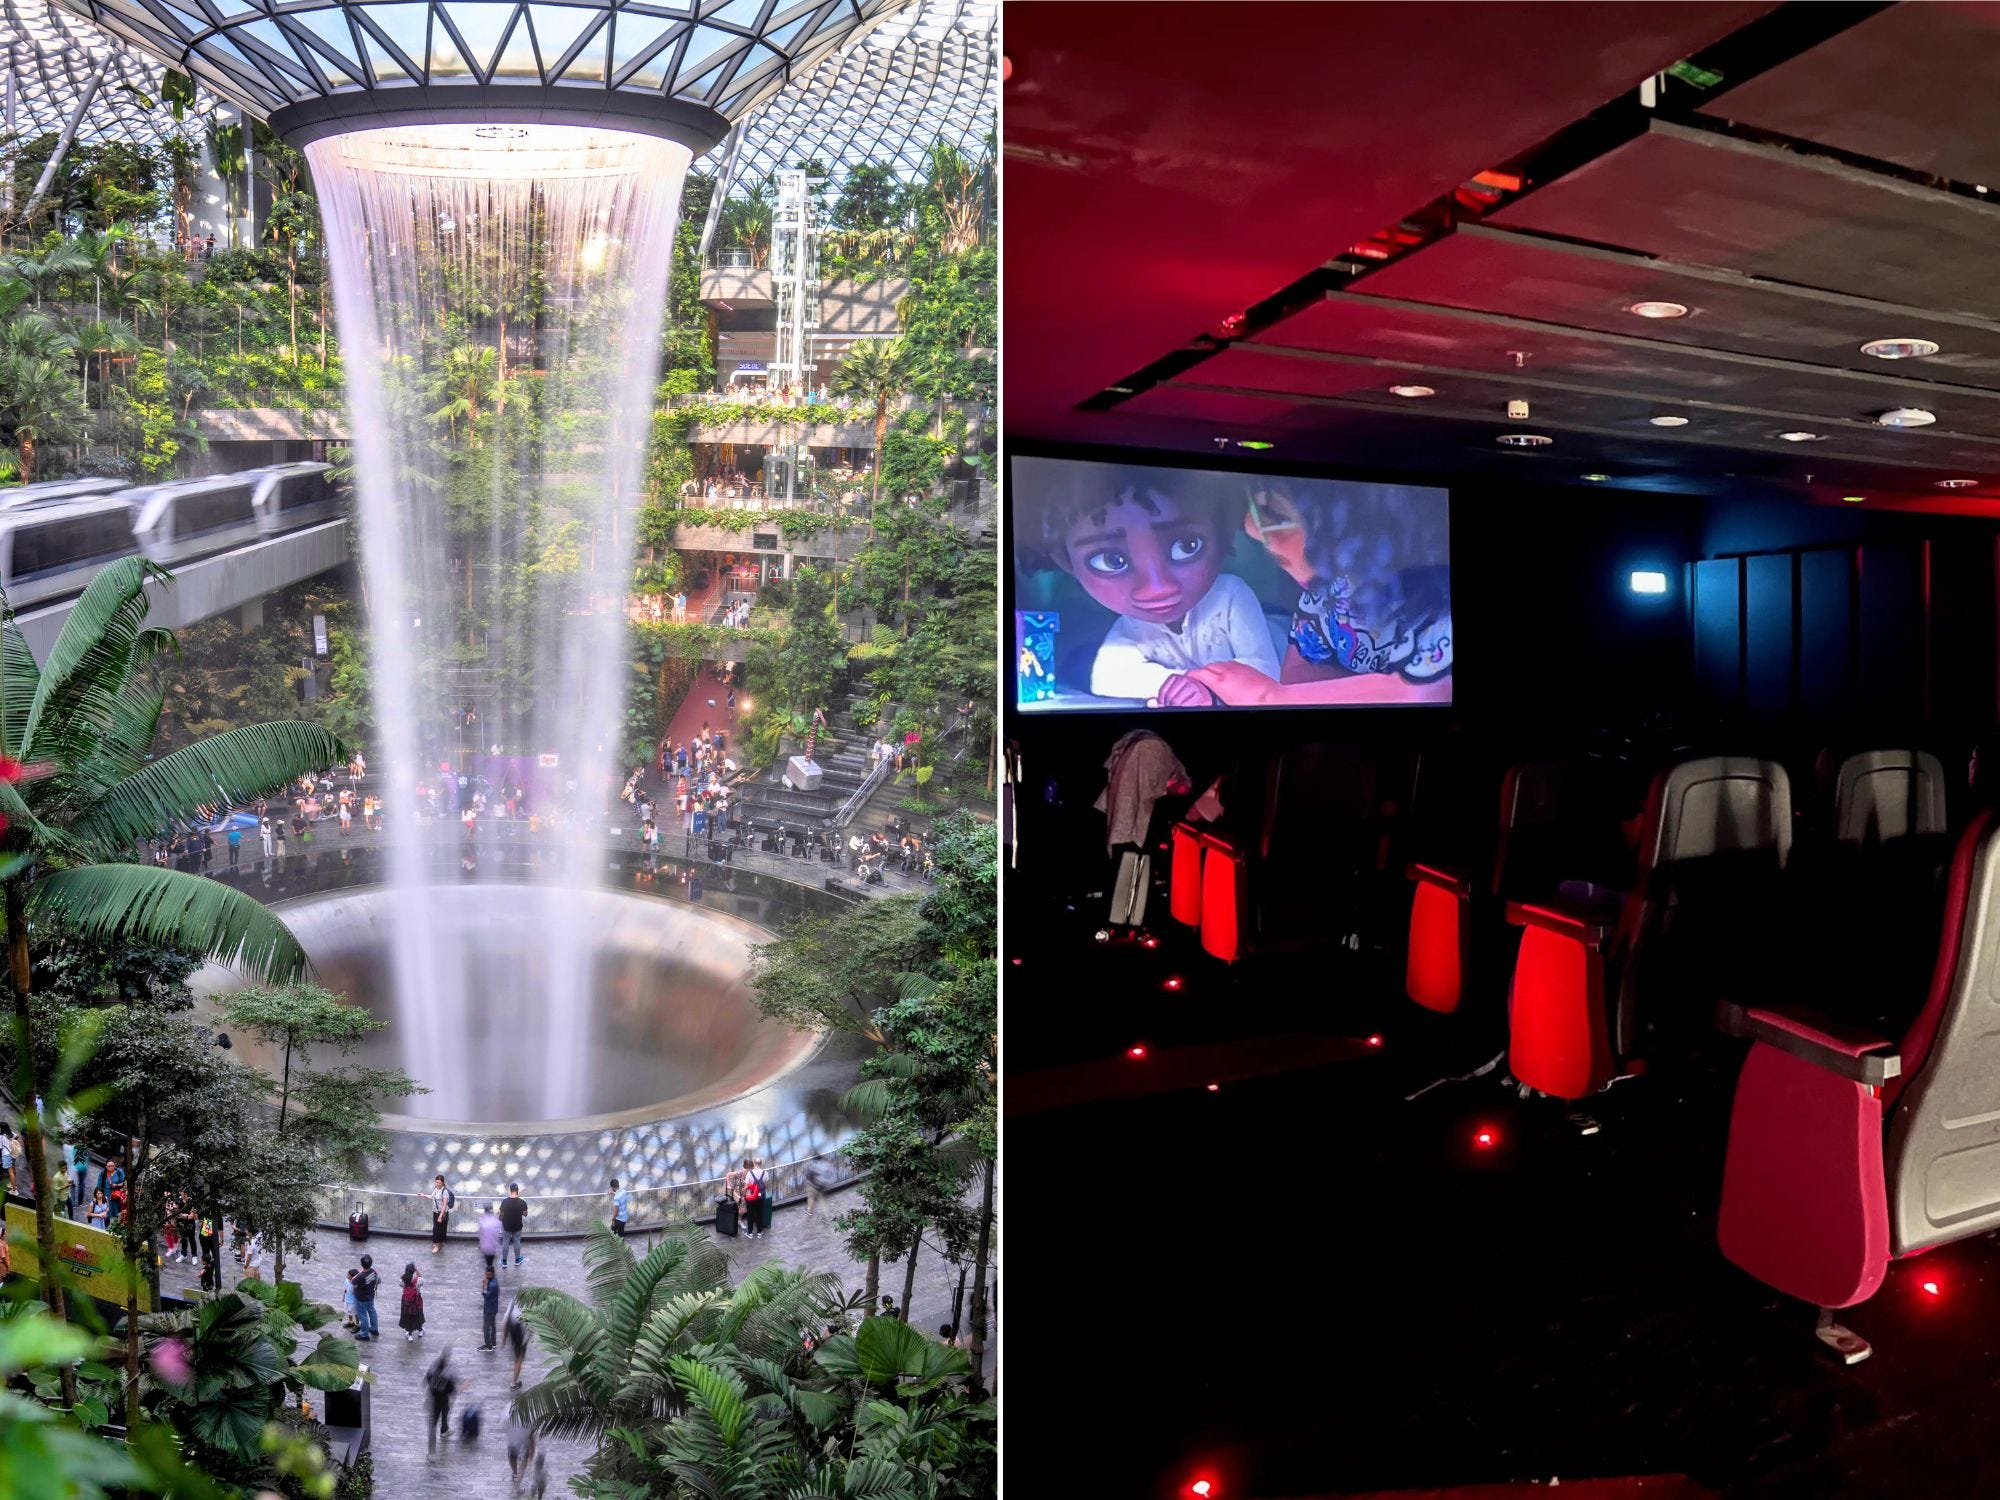 <p>"For best, <a href="https://www.businessinsider.com/spent-8-hours-singapore-changi-airport-pool-butterfly-garden-theater-2023-2">Singapore Changi Airport</a> is just untouchable," Ott said.</p><p>Ott added that the airport has multiple hotels, local art shops, and no shortage of things to do, see, and eat.</p><p>"Some of the best local food is at the airport because the famous places in Singapore set up locations there," he said.</p><p>There's a movie theater, a pool, a butterfly garden, and a wide range of shops.</p><p>But the real spectacle is probably the <a href="https://www.businessinsider.com/singapore-jewel-changi-airport-pandemic-photos-2021-2">Jewel</a>. The retail and entertainment complex, connected to Terminal 1, is home to activities like a ropes course, hedge maze, and topiary walk. The centerpiece is the Rain Vortex — the world's largest indoor waterfall spanning seven stories.</p><p>"You can spend an hour just looking at that," Ott said of the Rain Vortex. "I would have a layover there any day."</p>